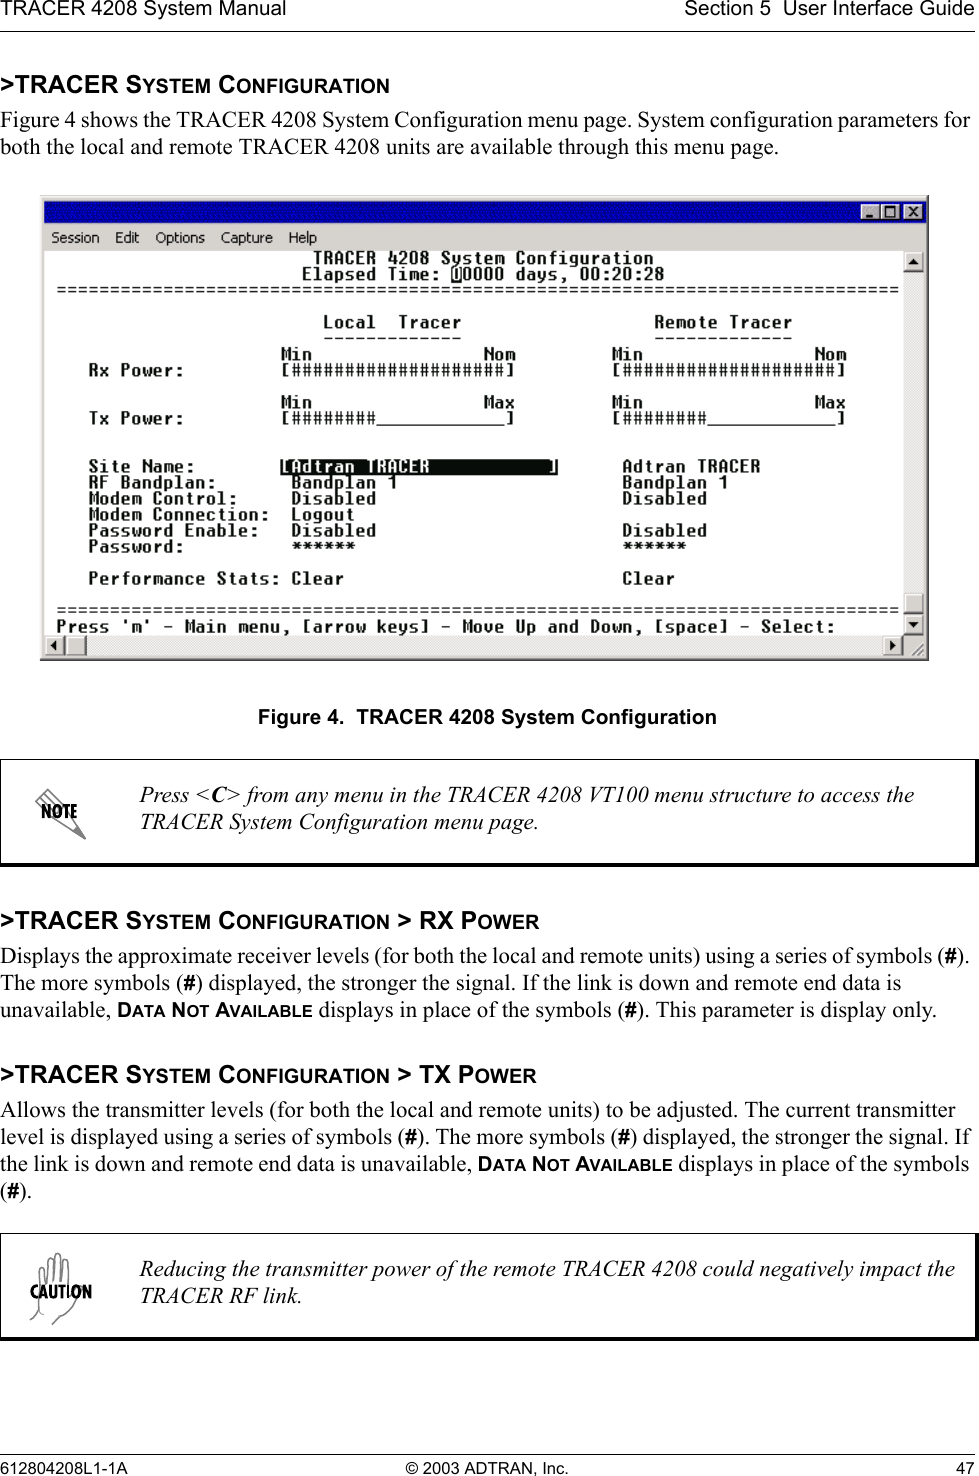 TRACER 4208 System Manual Section 5  User Interface Guide612804208L1-1A © 2003 ADTRAN, Inc. 47&gt;TRACER SYSTEM CONFIGURATIONFigure 4 shows the TRACER 4208 System Configuration menu page. System configuration parameters for both the local and remote TRACER 4208 units are available through this menu page.Figure 4.  TRACER 4208 System Configuration&gt;TRACER SYSTEM CONFIGURATION &gt; RX POWERDisplays the approximate receiver levels (for both the local and remote units) using a series of symbols (#). The more symbols (#) displayed, the stronger the signal. If the link is down and remote end data is unavailable, DATA NOT AVAILABLE displays in place of the symbols (#). This parameter is display only.&gt;TRACER SYSTEM CONFIGURATION &gt; TX POWERAllows the transmitter levels (for both the local and remote units) to be adjusted. The current transmitter level is displayed using a series of symbols (#). The more symbols (#) displayed, the stronger the signal. If the link is down and remote end data is unavailable, DATA NOT AVAILABLE displays in place of the symbols (#).Press &lt;C&gt; from any menu in the TRACER 4208 VT100 menu structure to access the TRACER System Configuration menu page.Reducing the transmitter power of the remote TRACER 4208 could negatively impact the TRACER RF link.